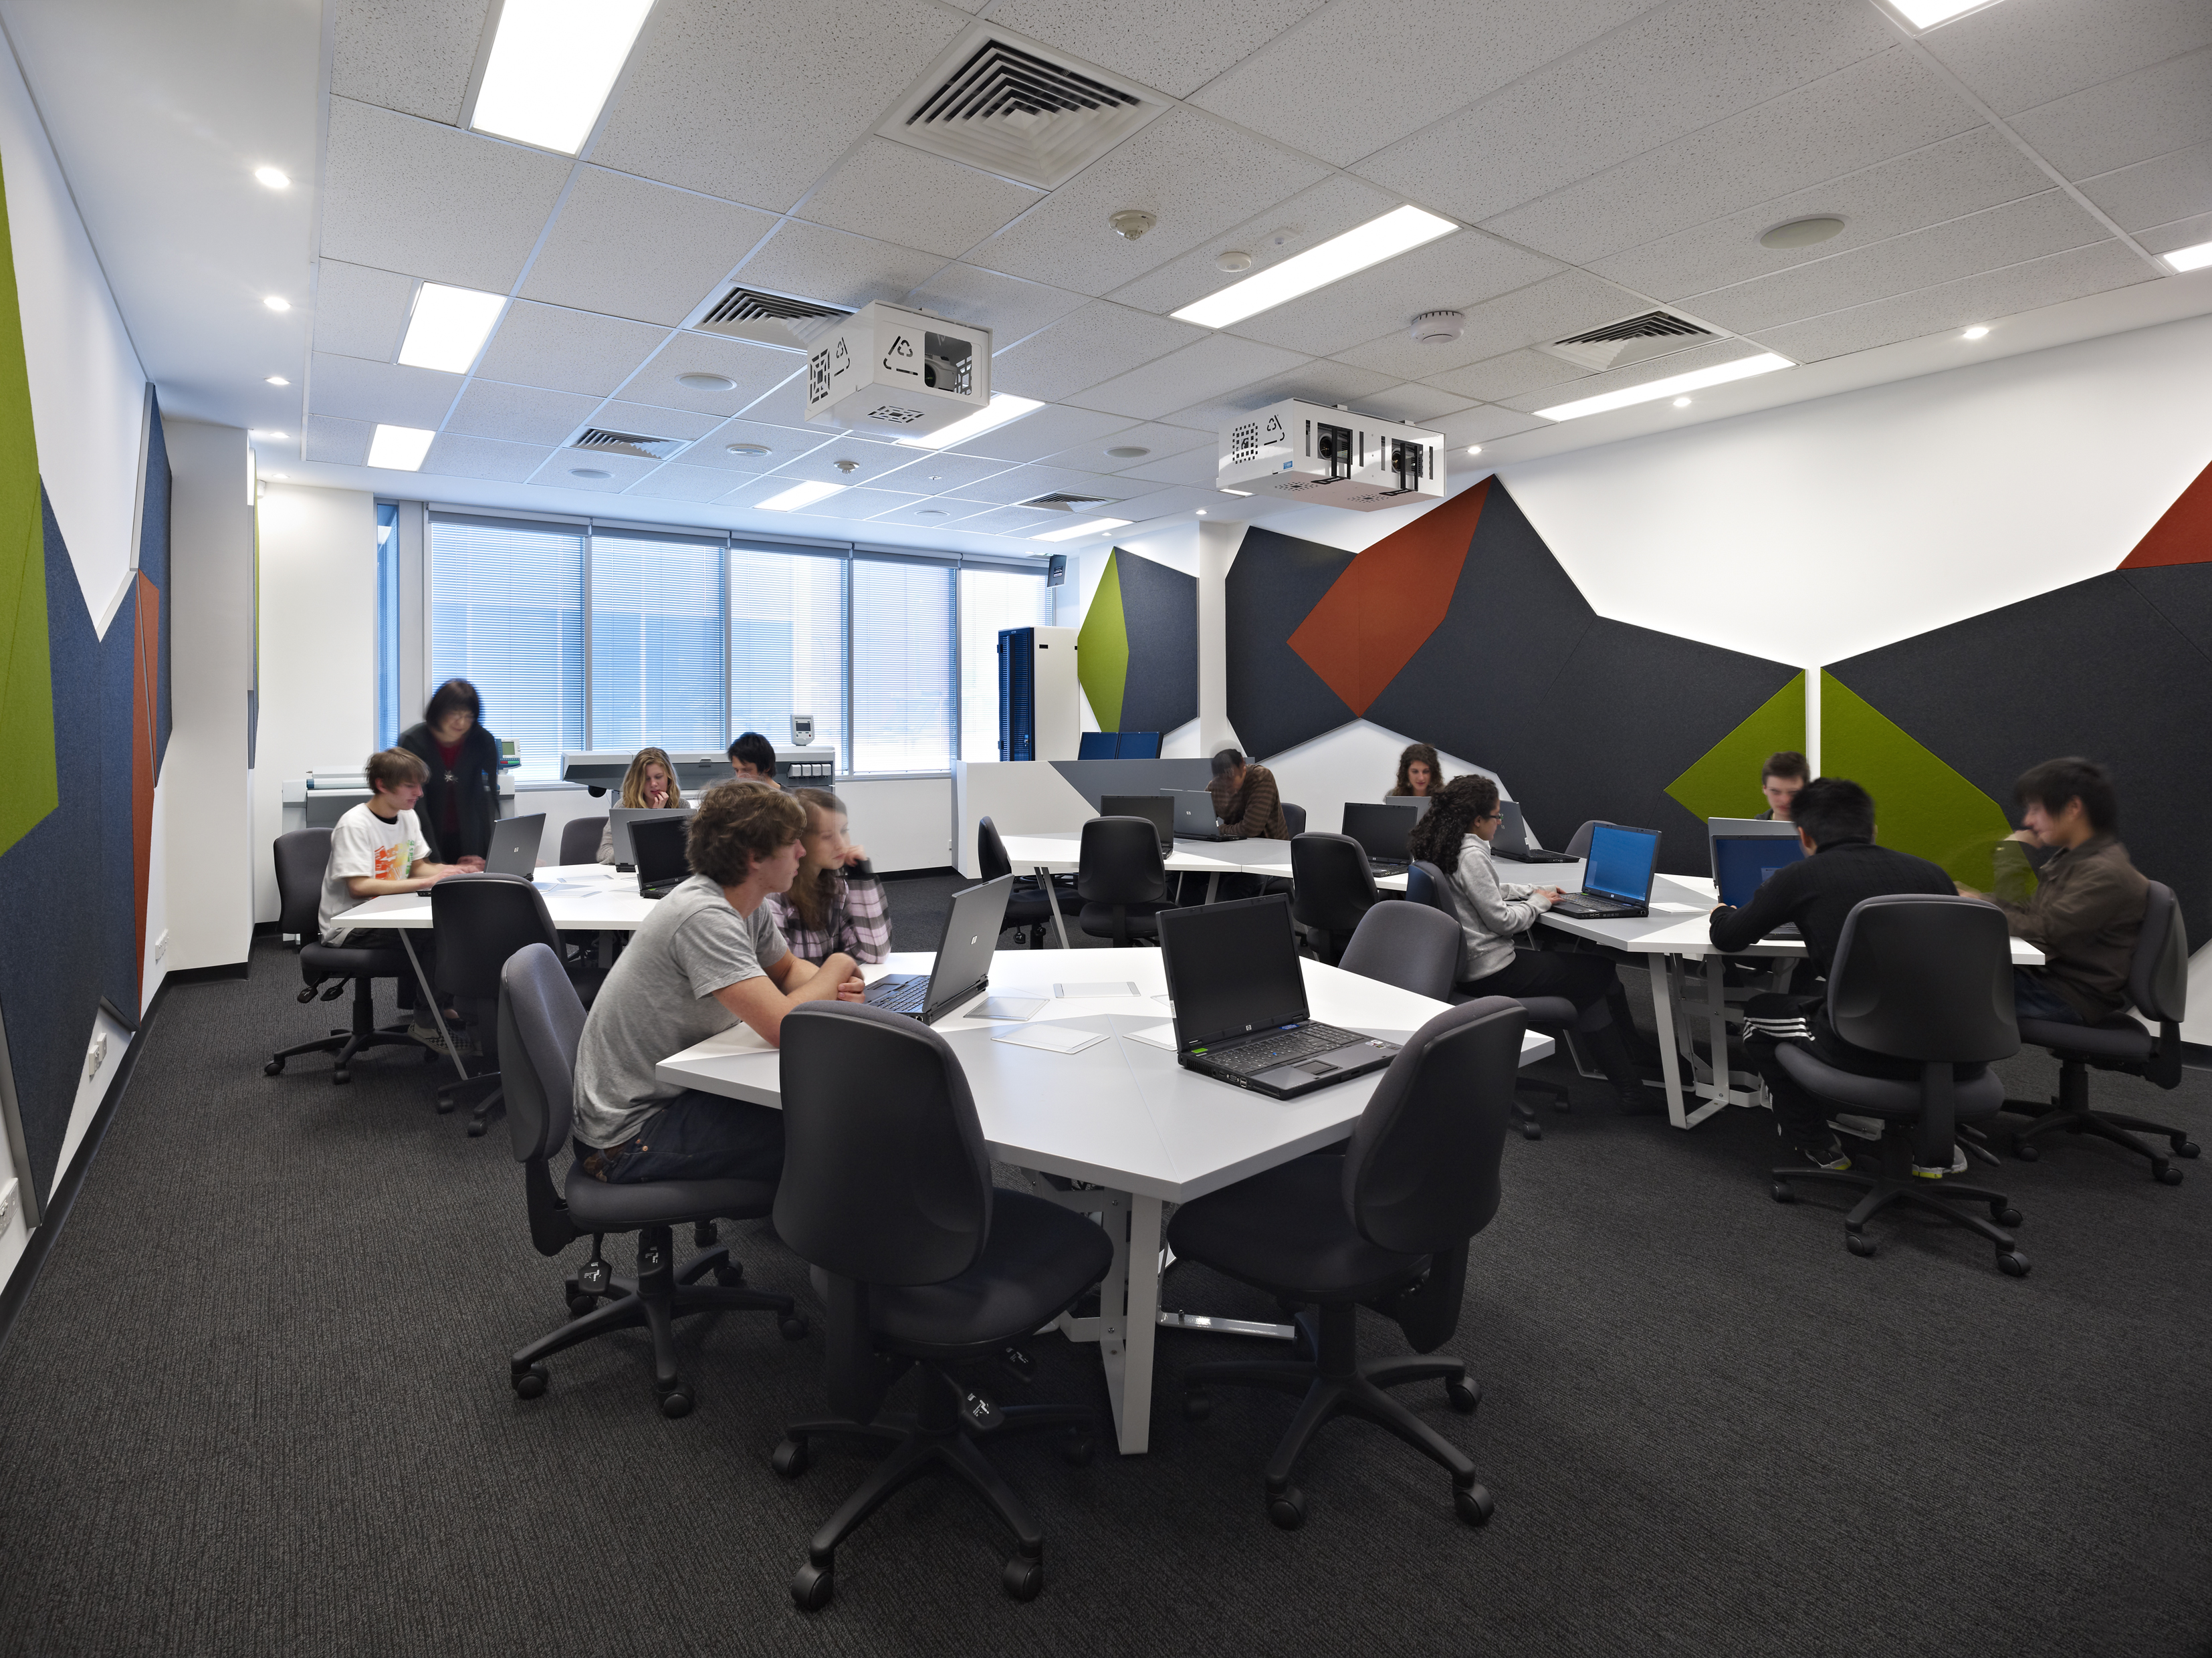 A wide shot of a classroom setting inside an RMIT building with students sitting at desks, working on laptops